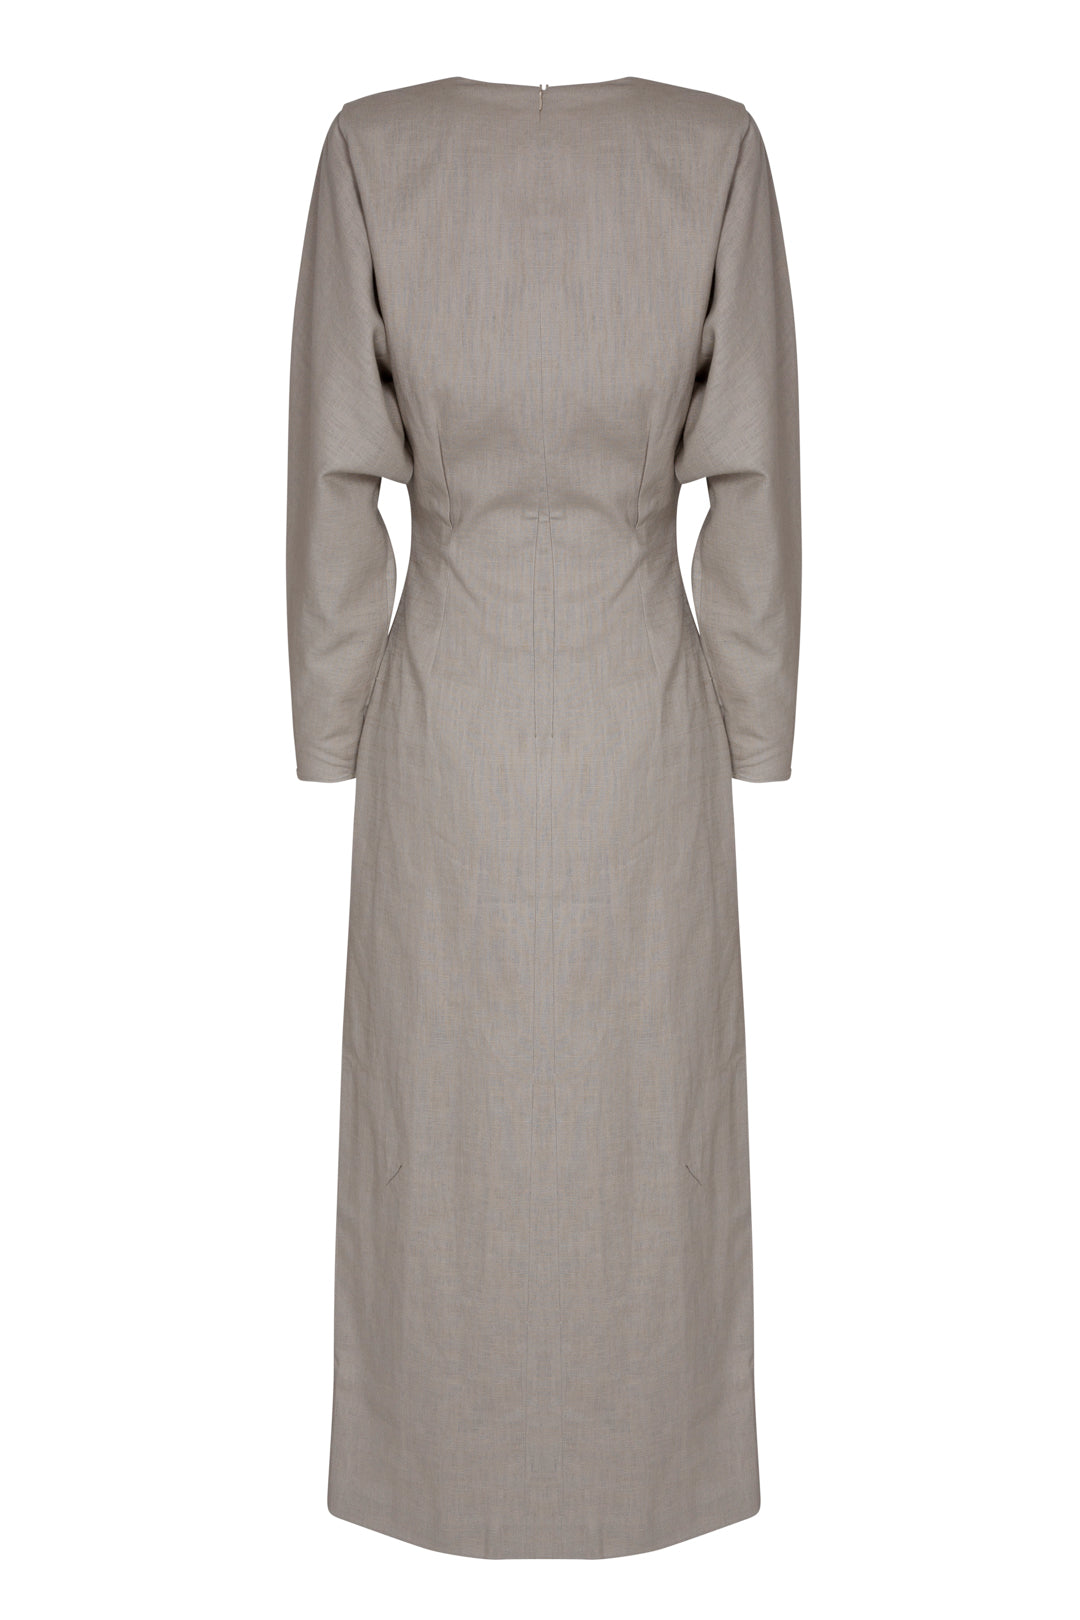 NATURAL LINEN ROMA DRESS WITH BLACK EMBROIDERY